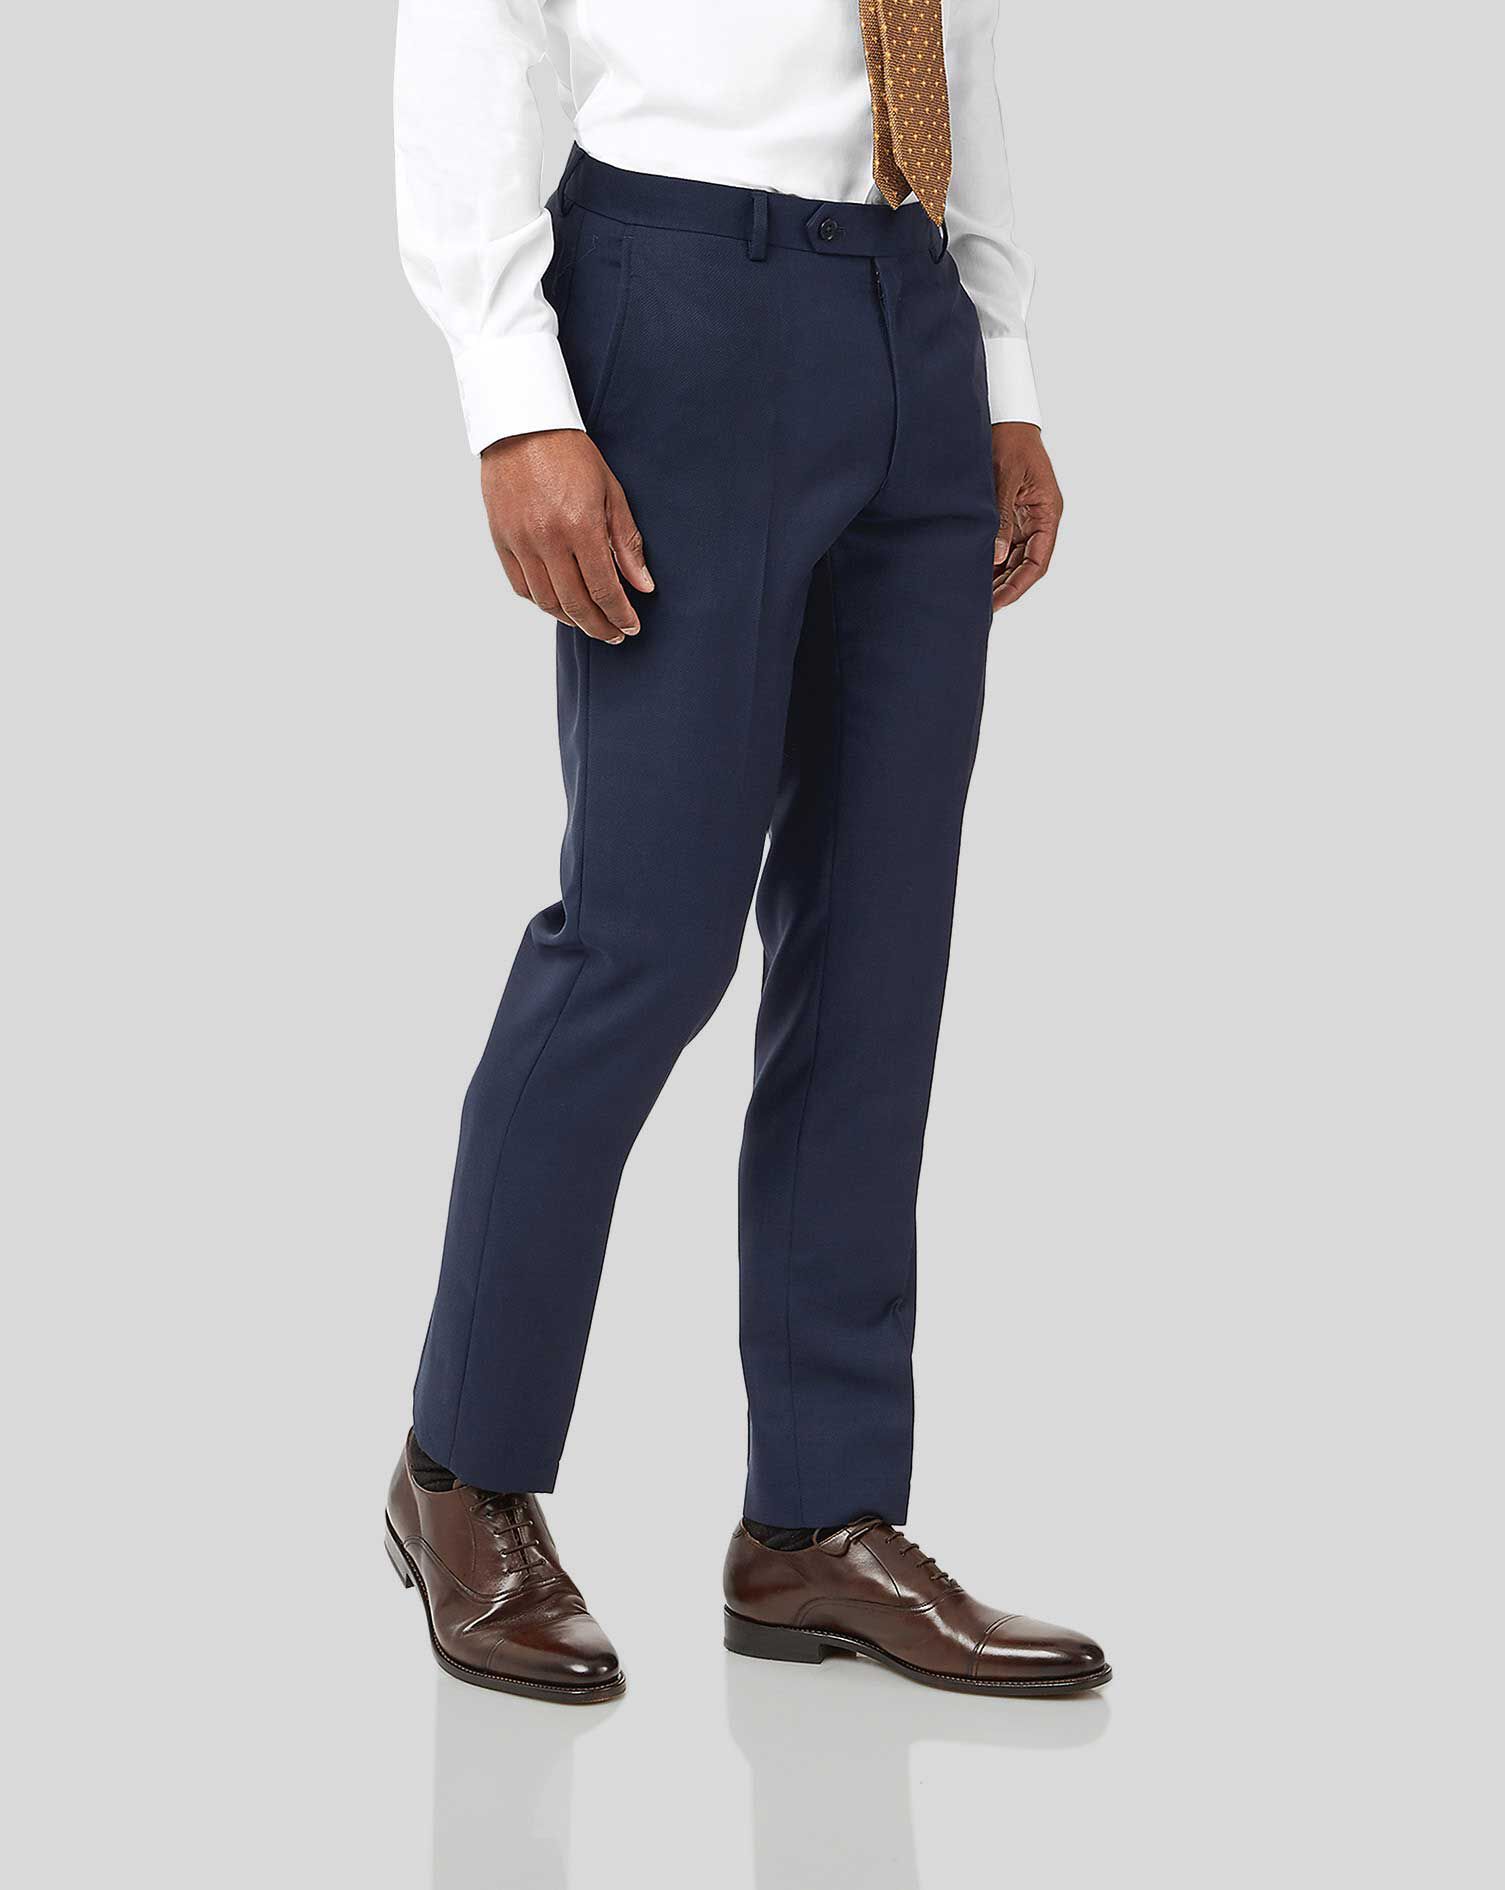 Buy Midnight Blue Chinos for Men Online in India at Beyoung